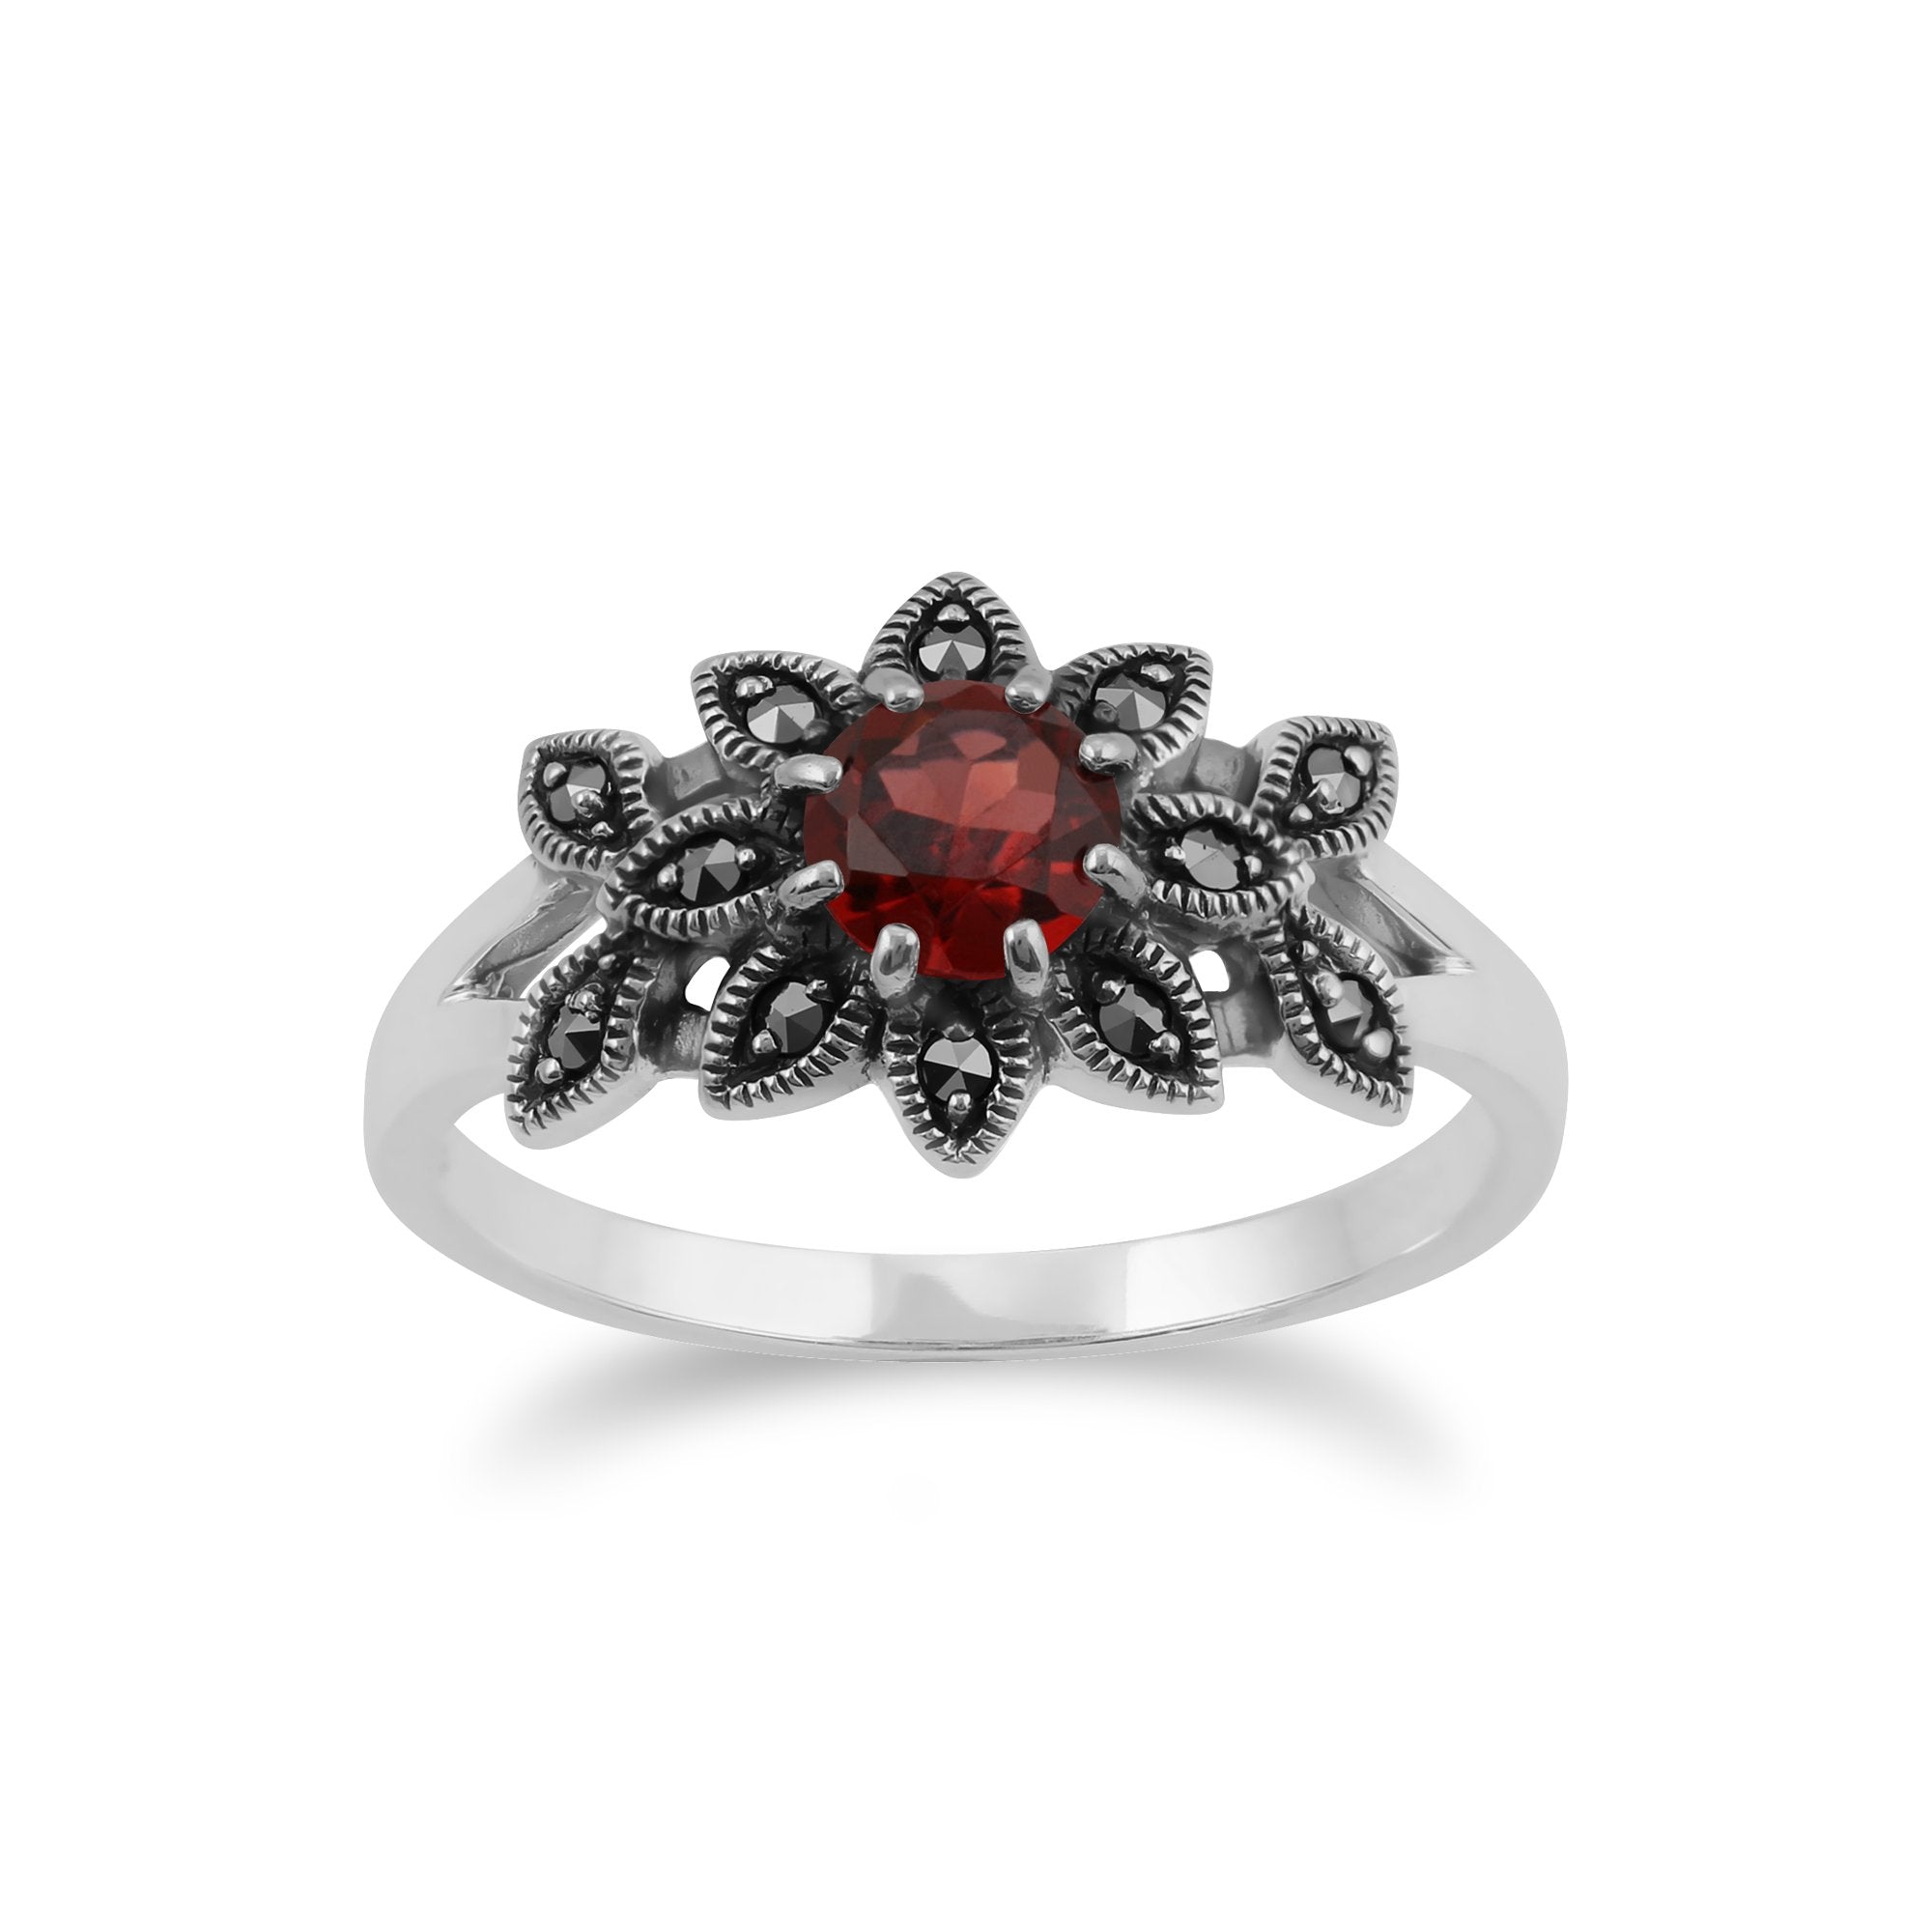 Art Nouveau Style Round Garnet & Marcasite Floral Ring in 925 Sterling Silver